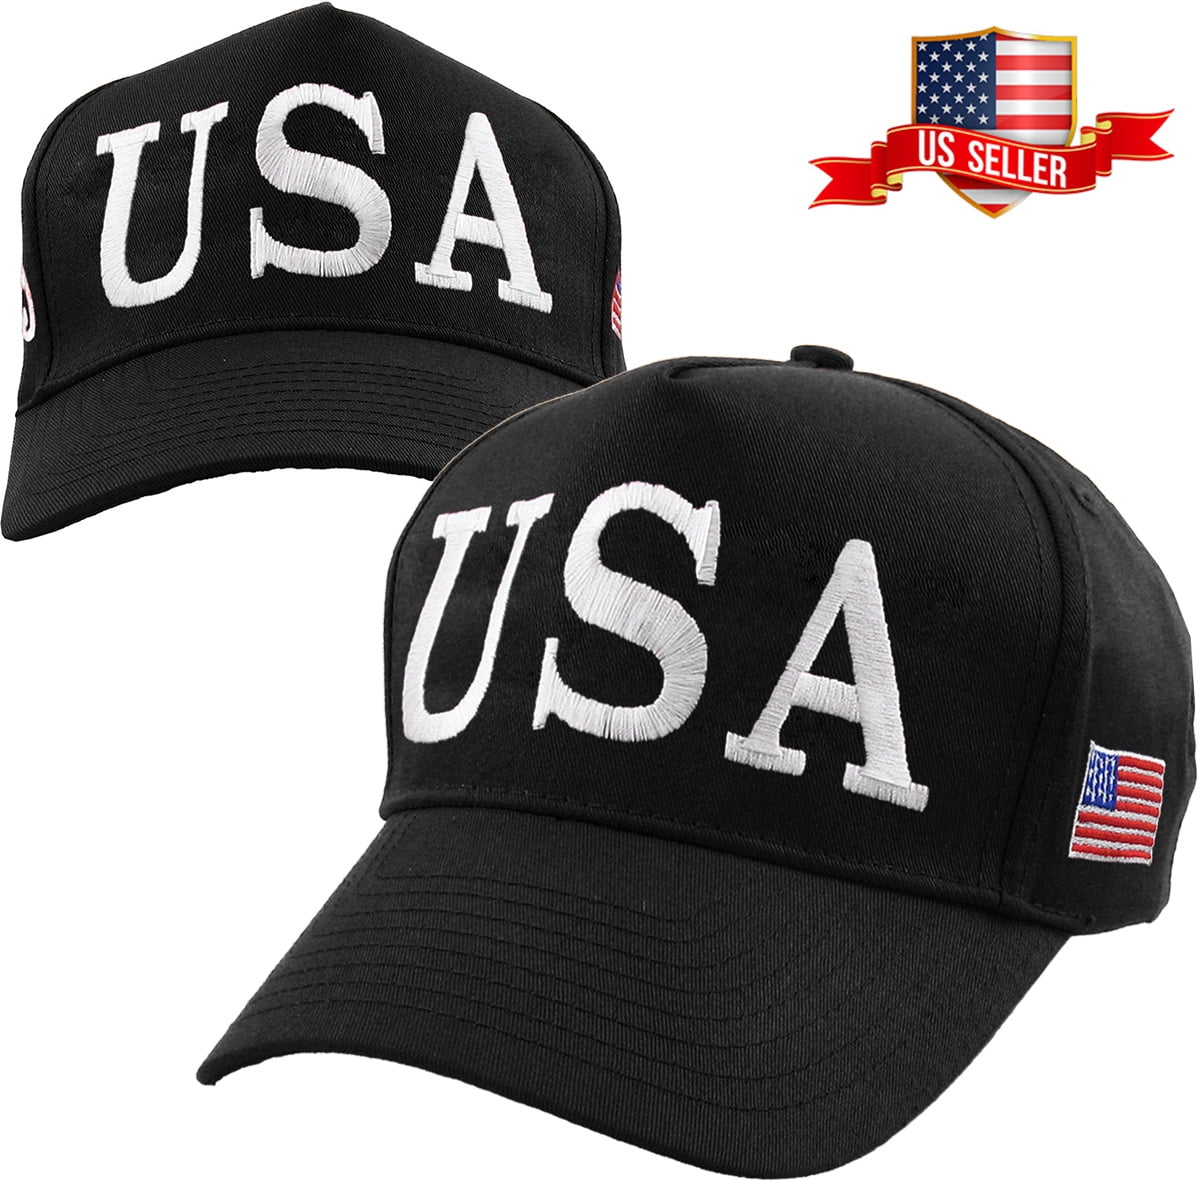 45th President of the United States Donald Trump USA Baseball Cap Adjustable Hat 